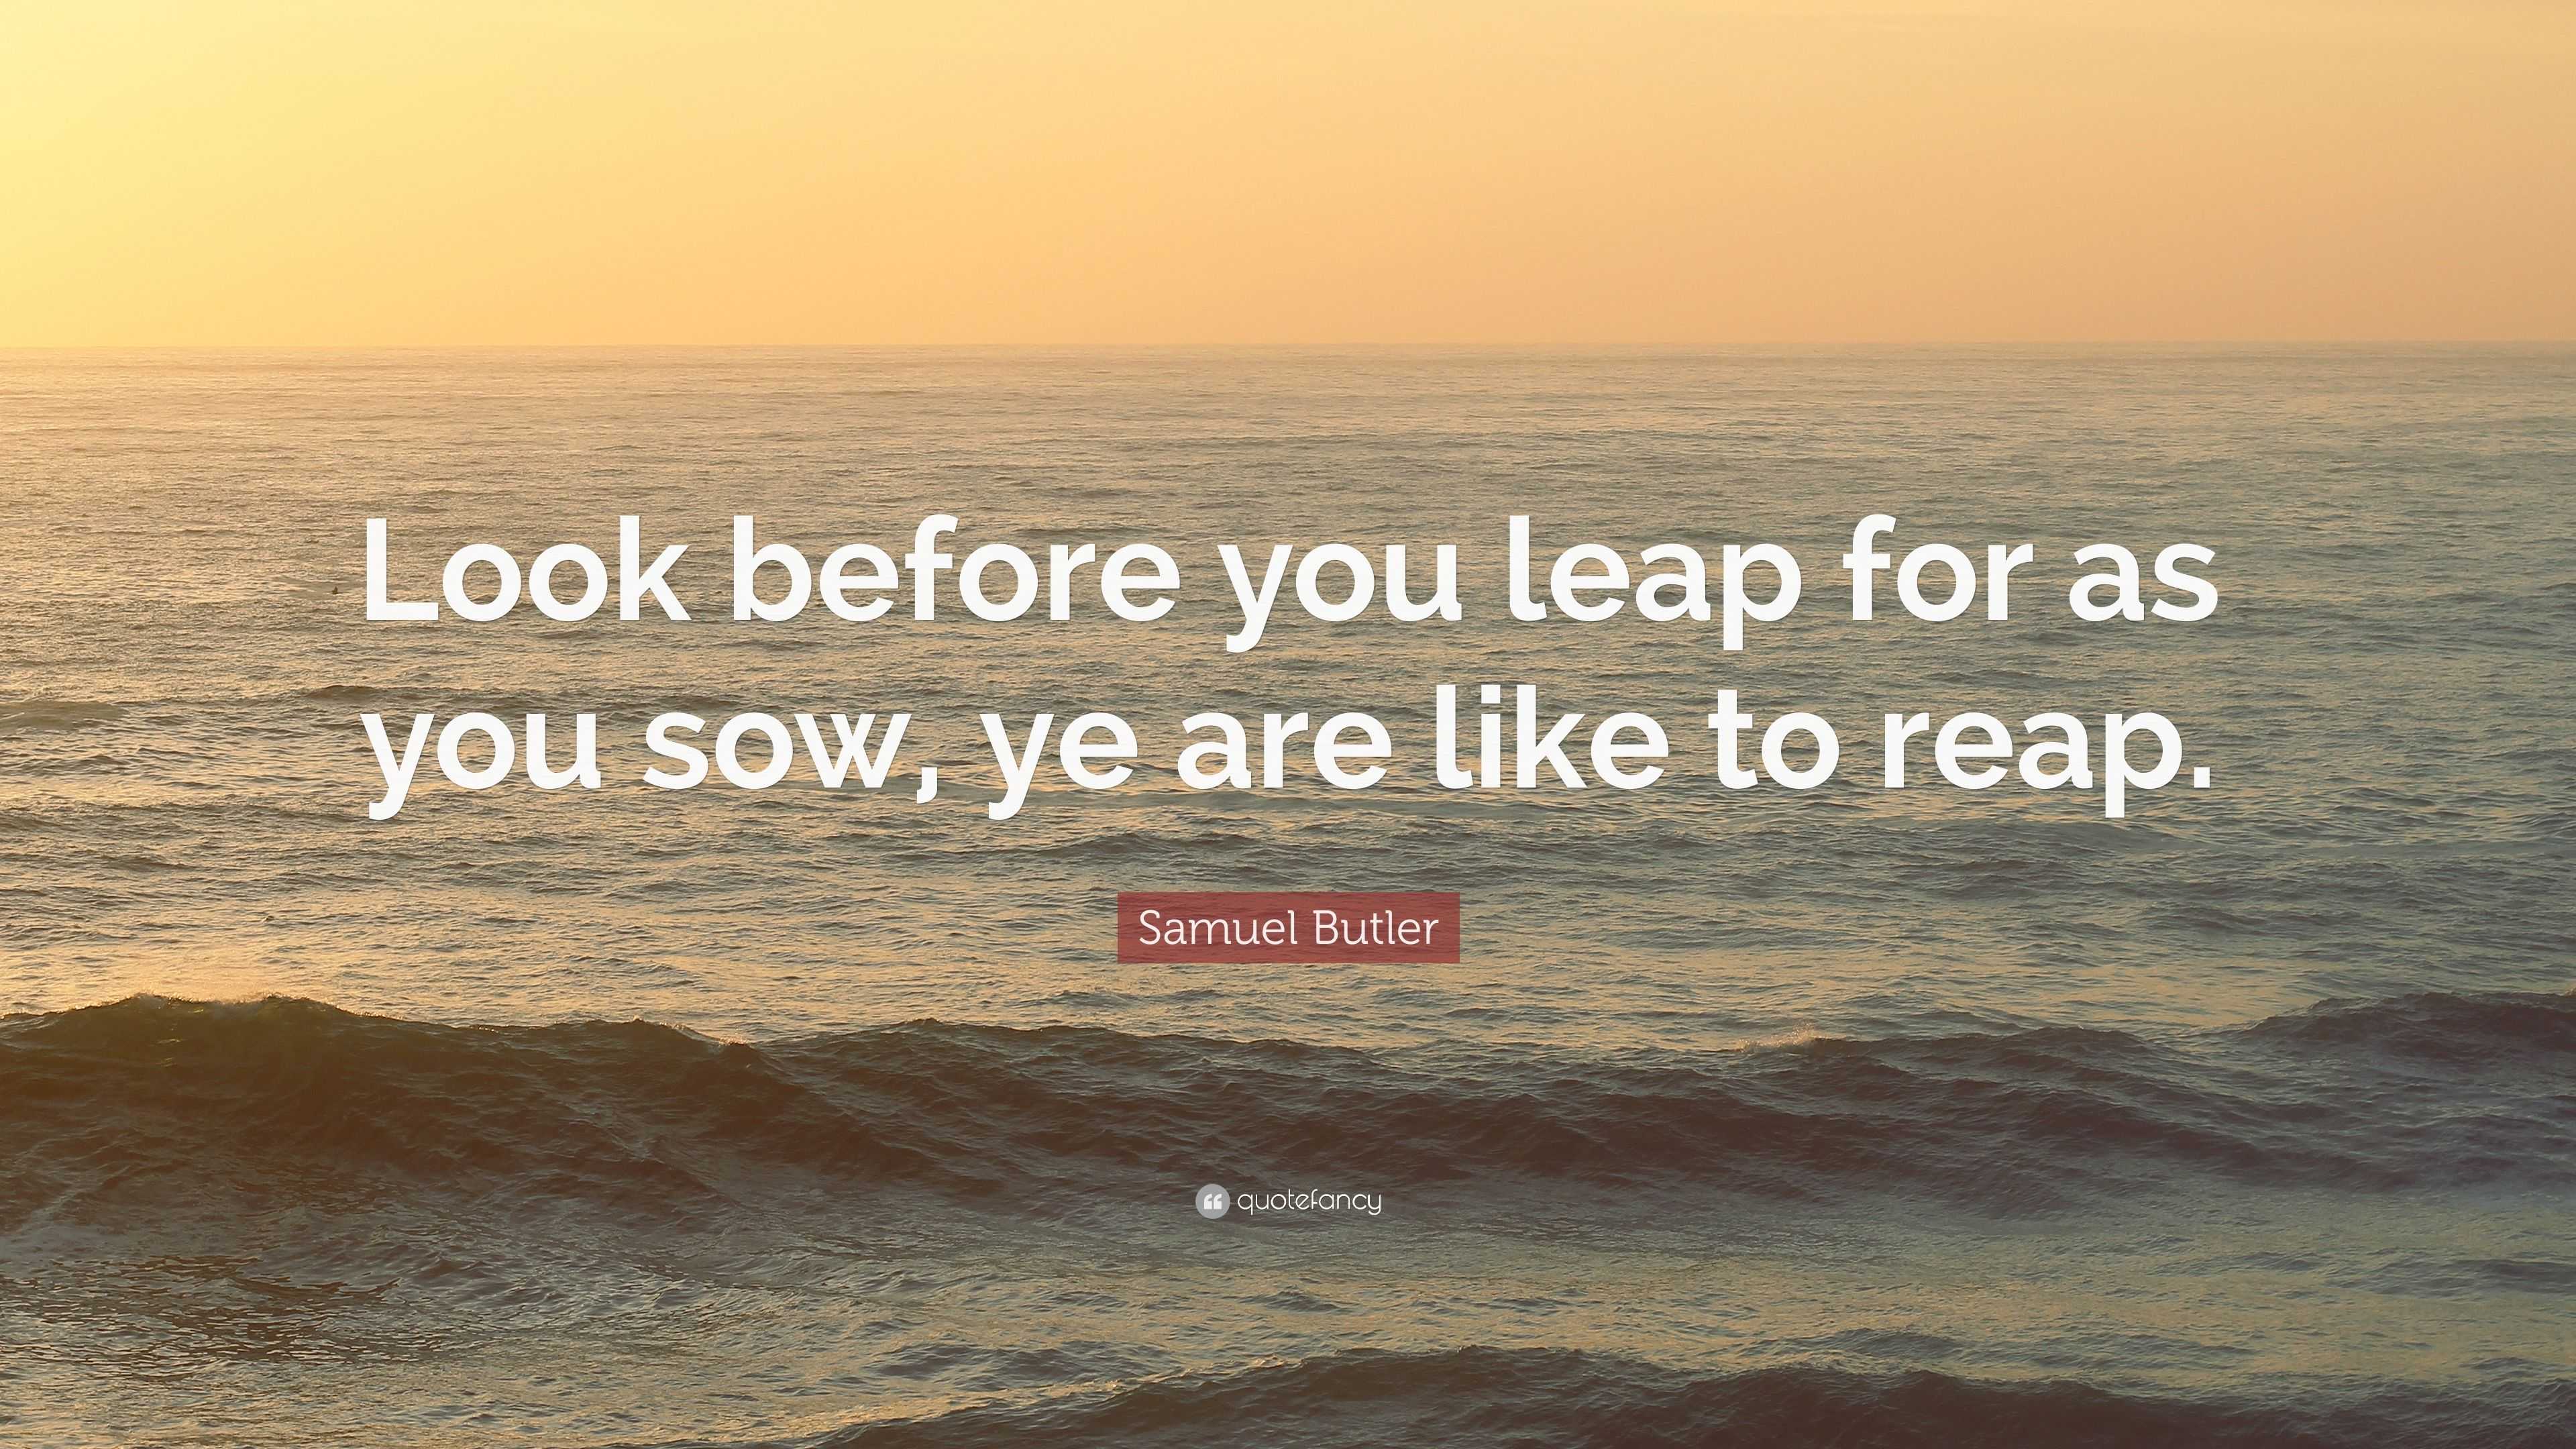 Samuel Butler Quote Look Before You Leap For As You Sow Ye Are Like To Reap